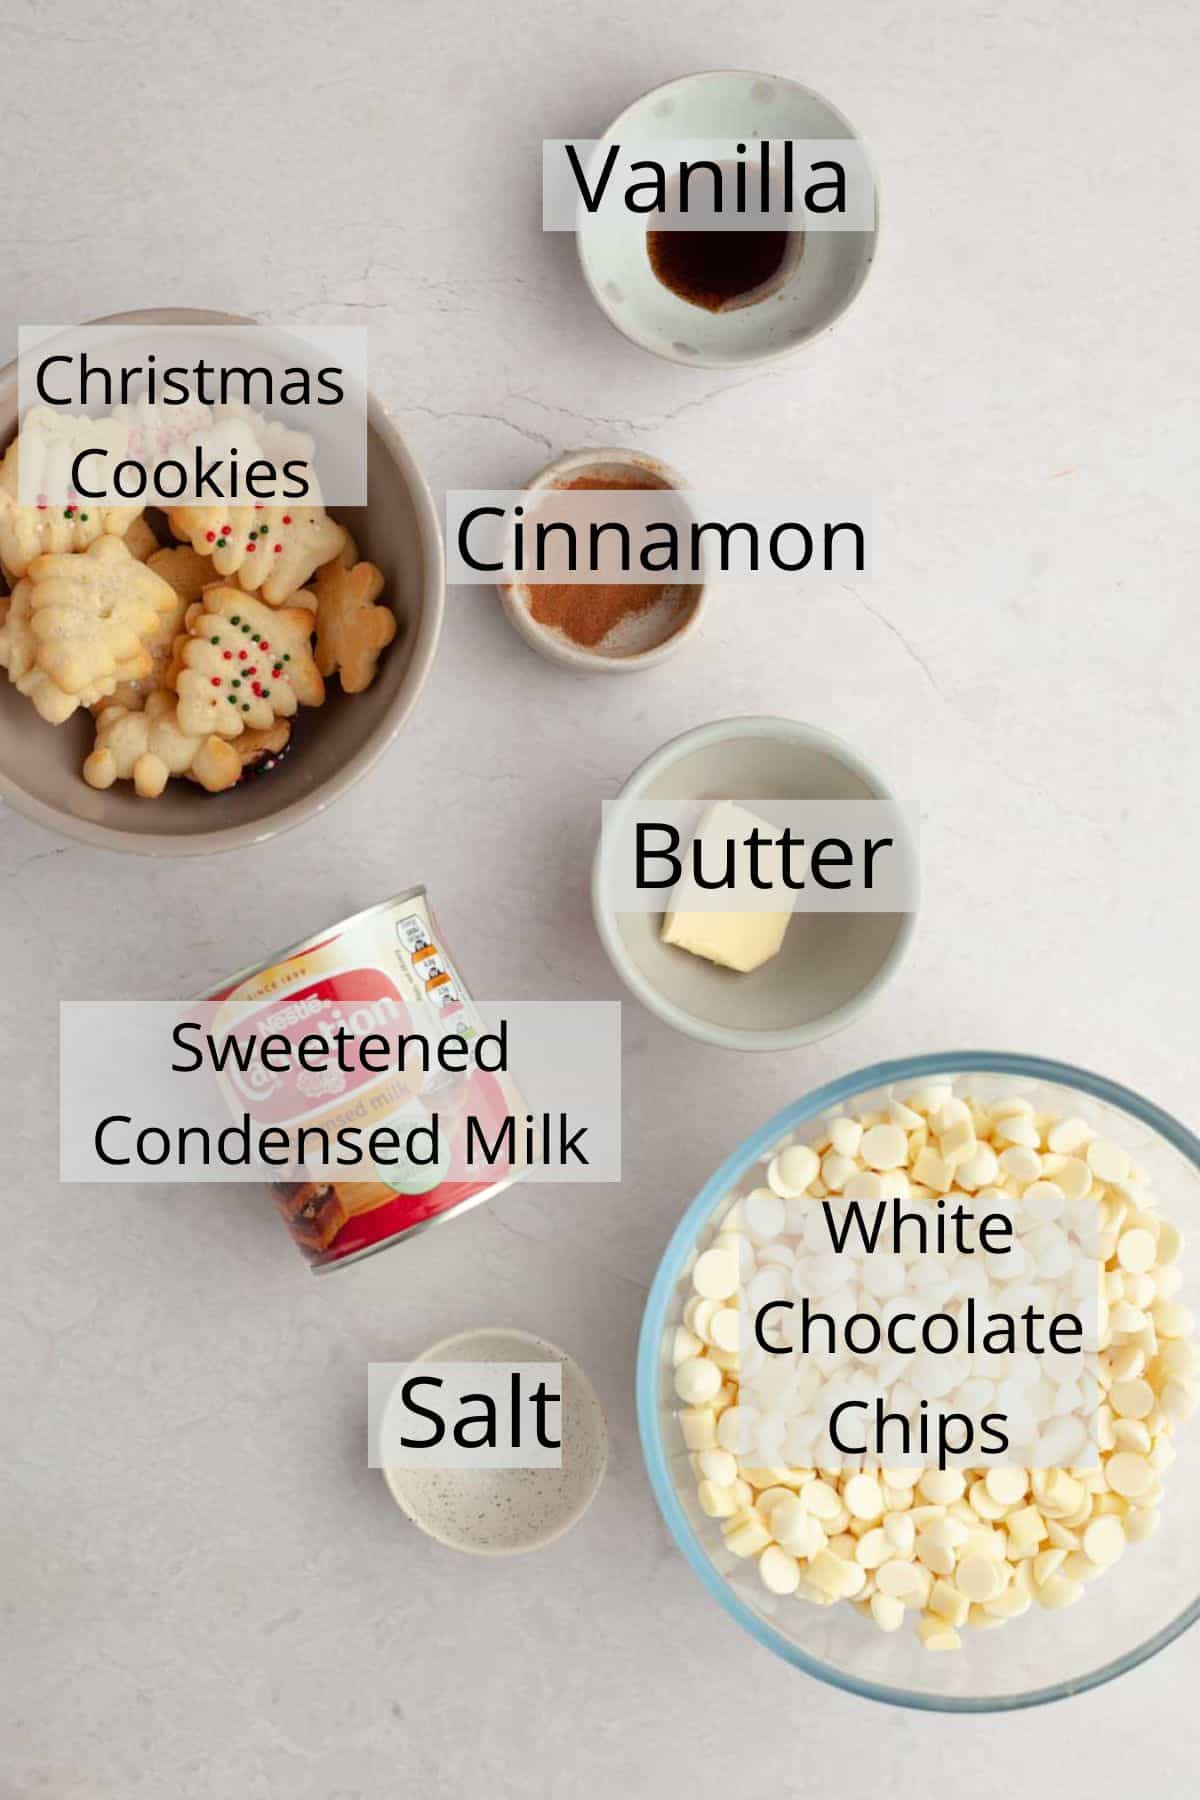 All the ingredients needed to make Christmas cookie fudge weighed out into small bowls.